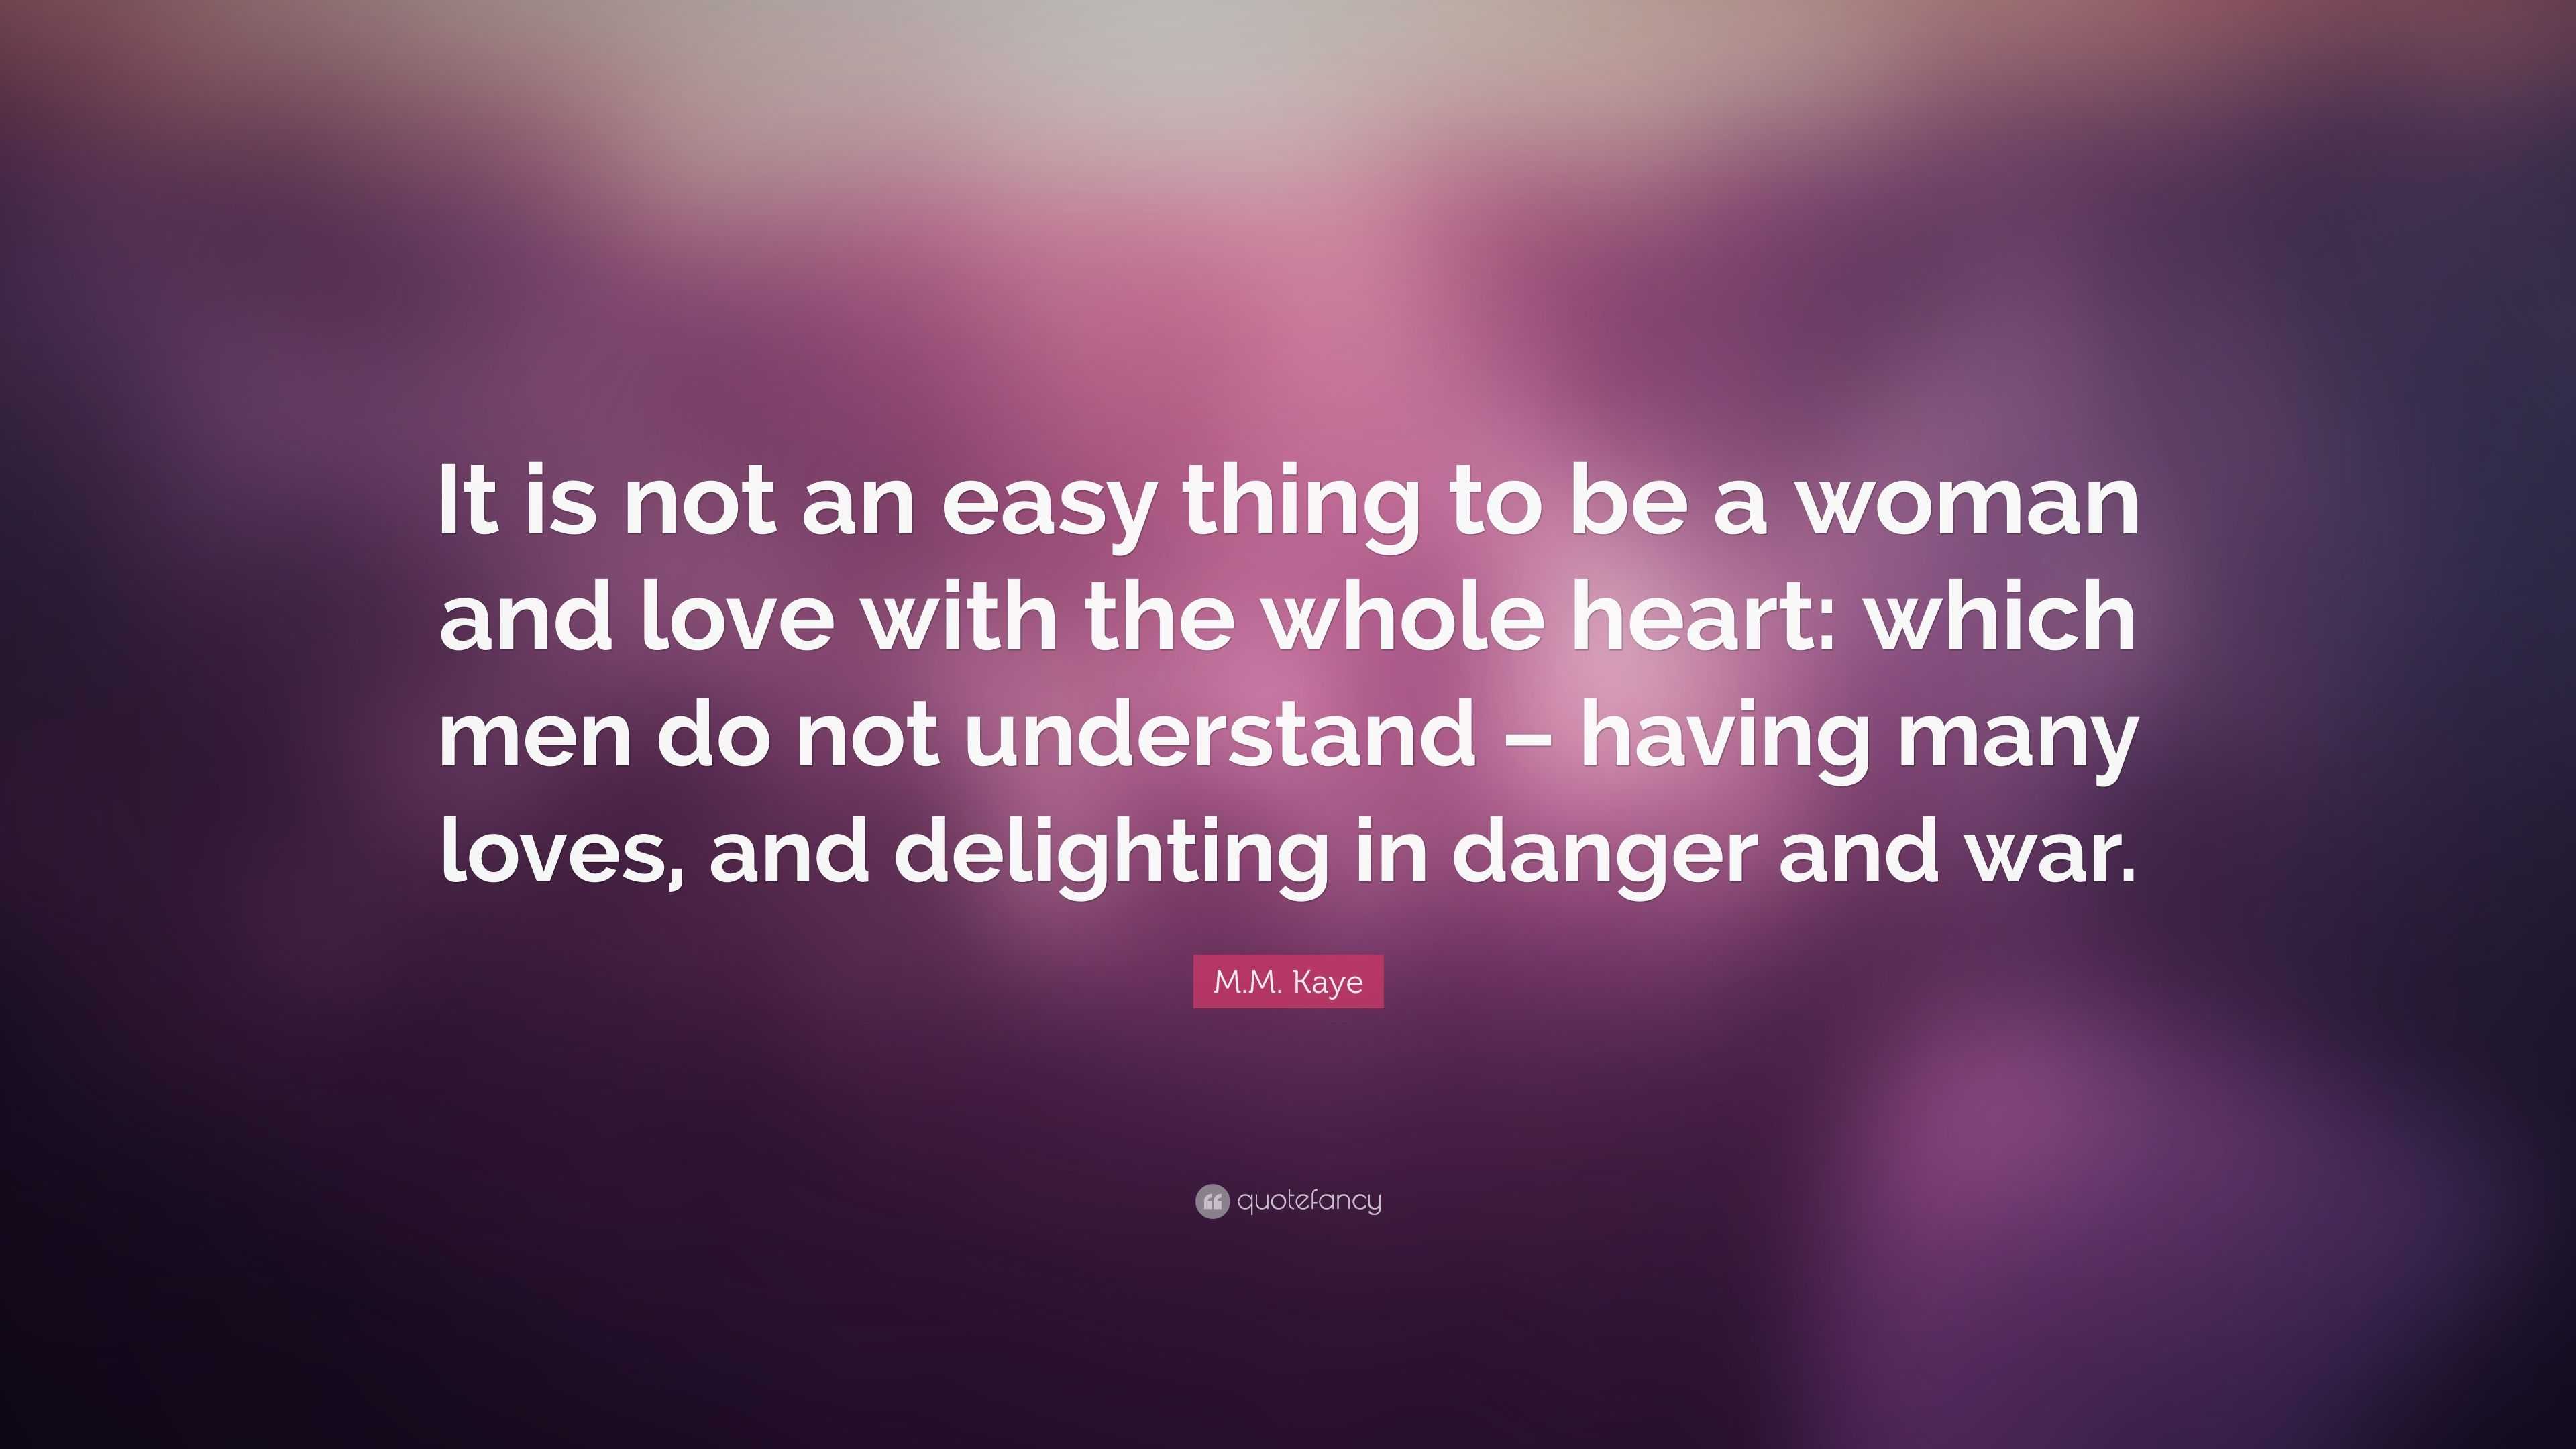 M.M. Kaye Quote: “It is not an easy thing to be a woman and love with ...